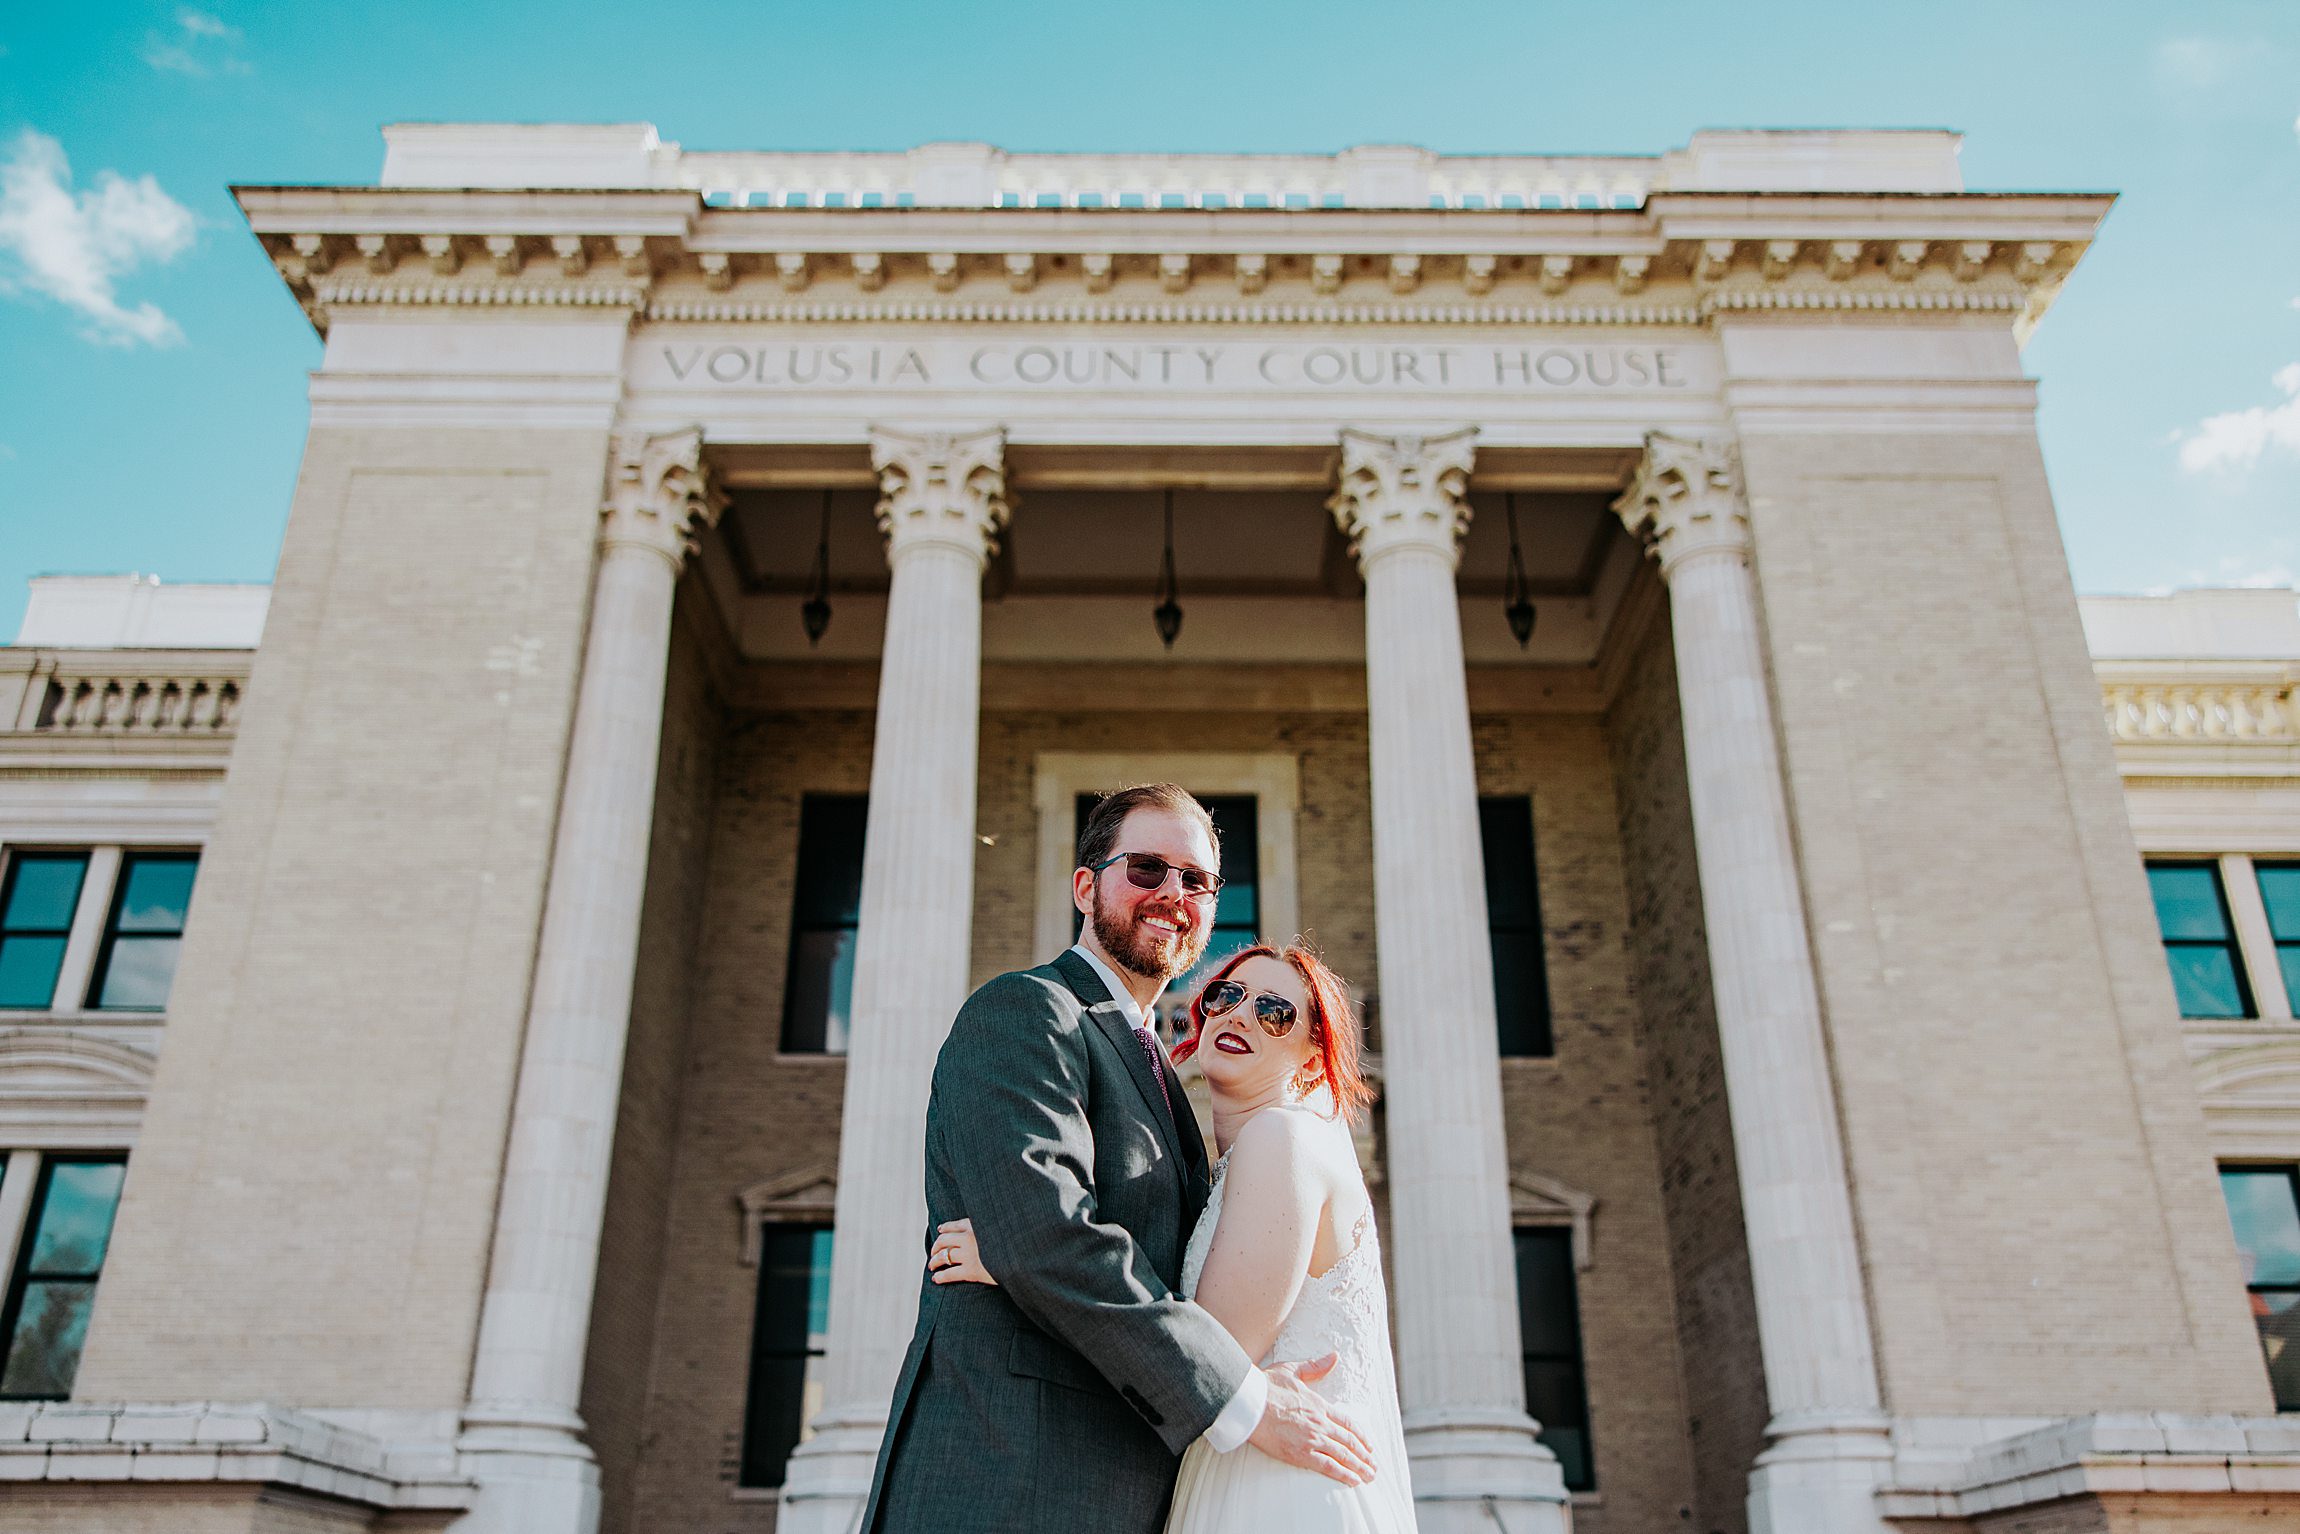 straight couple posing in front of the old volusia county courthouse after their civil wedding ceremony